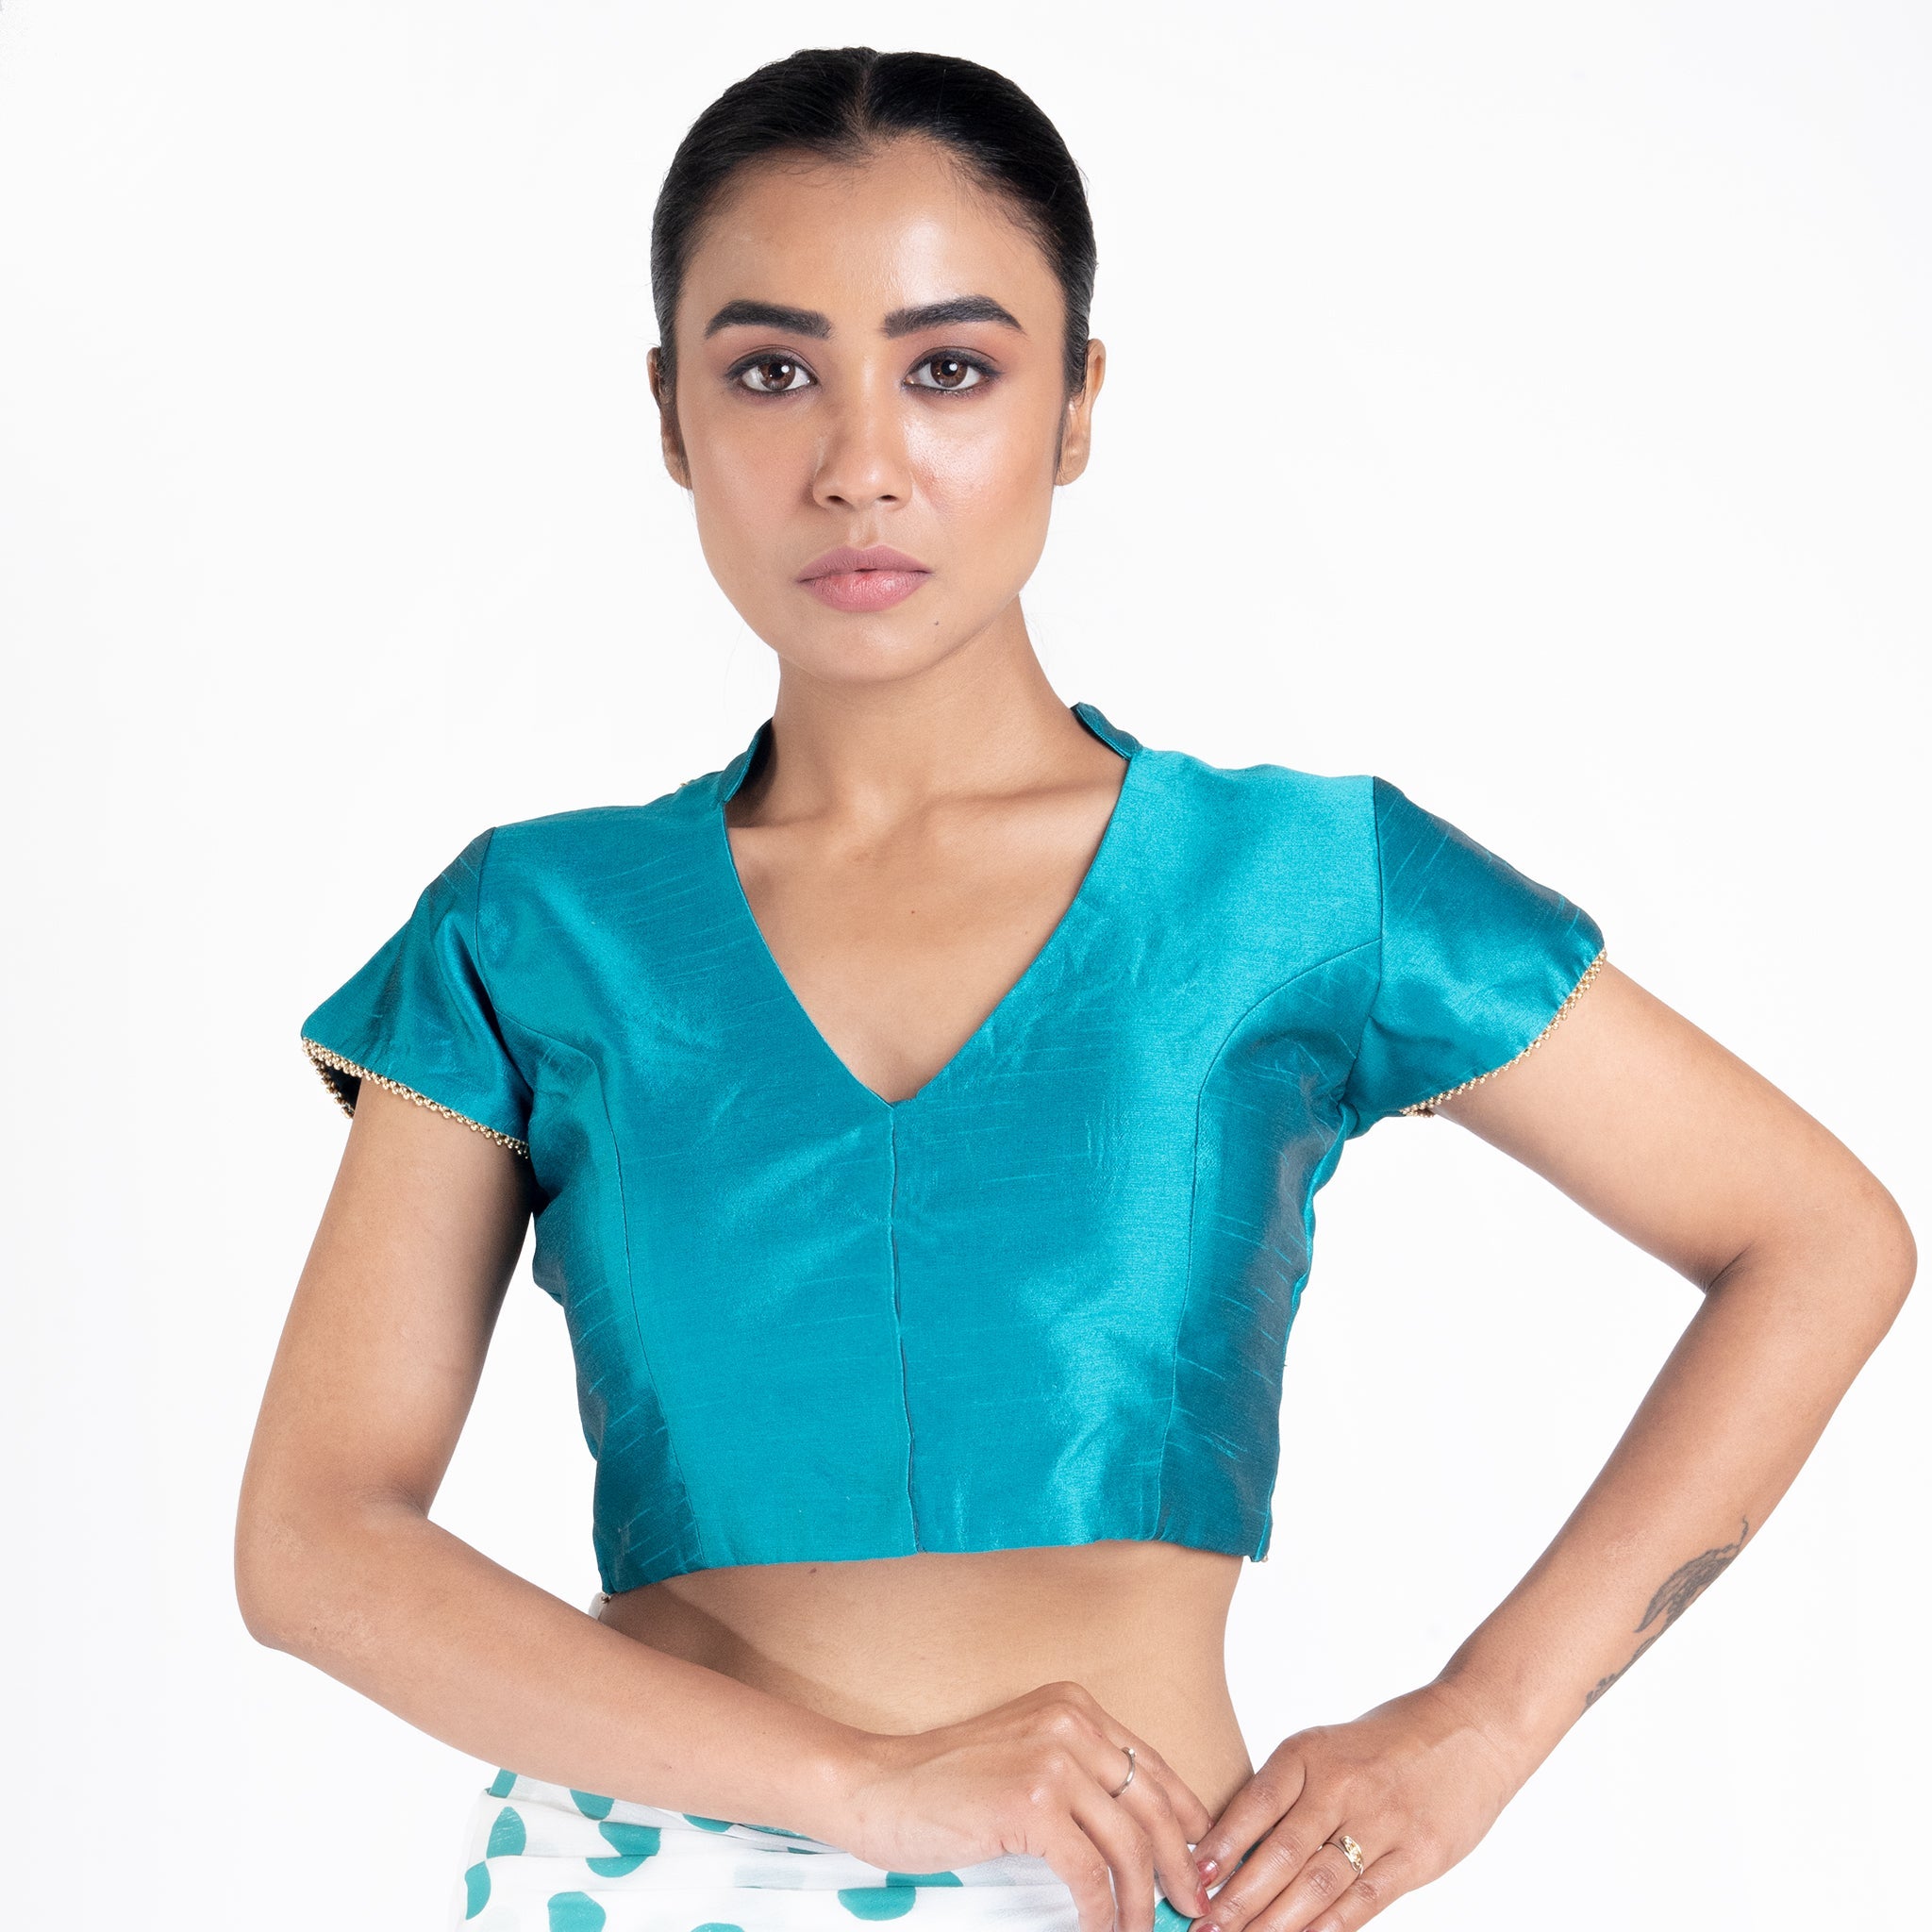 Women's Teal Raw Silk Padded Blouse With Back Overlap Design - Boveee